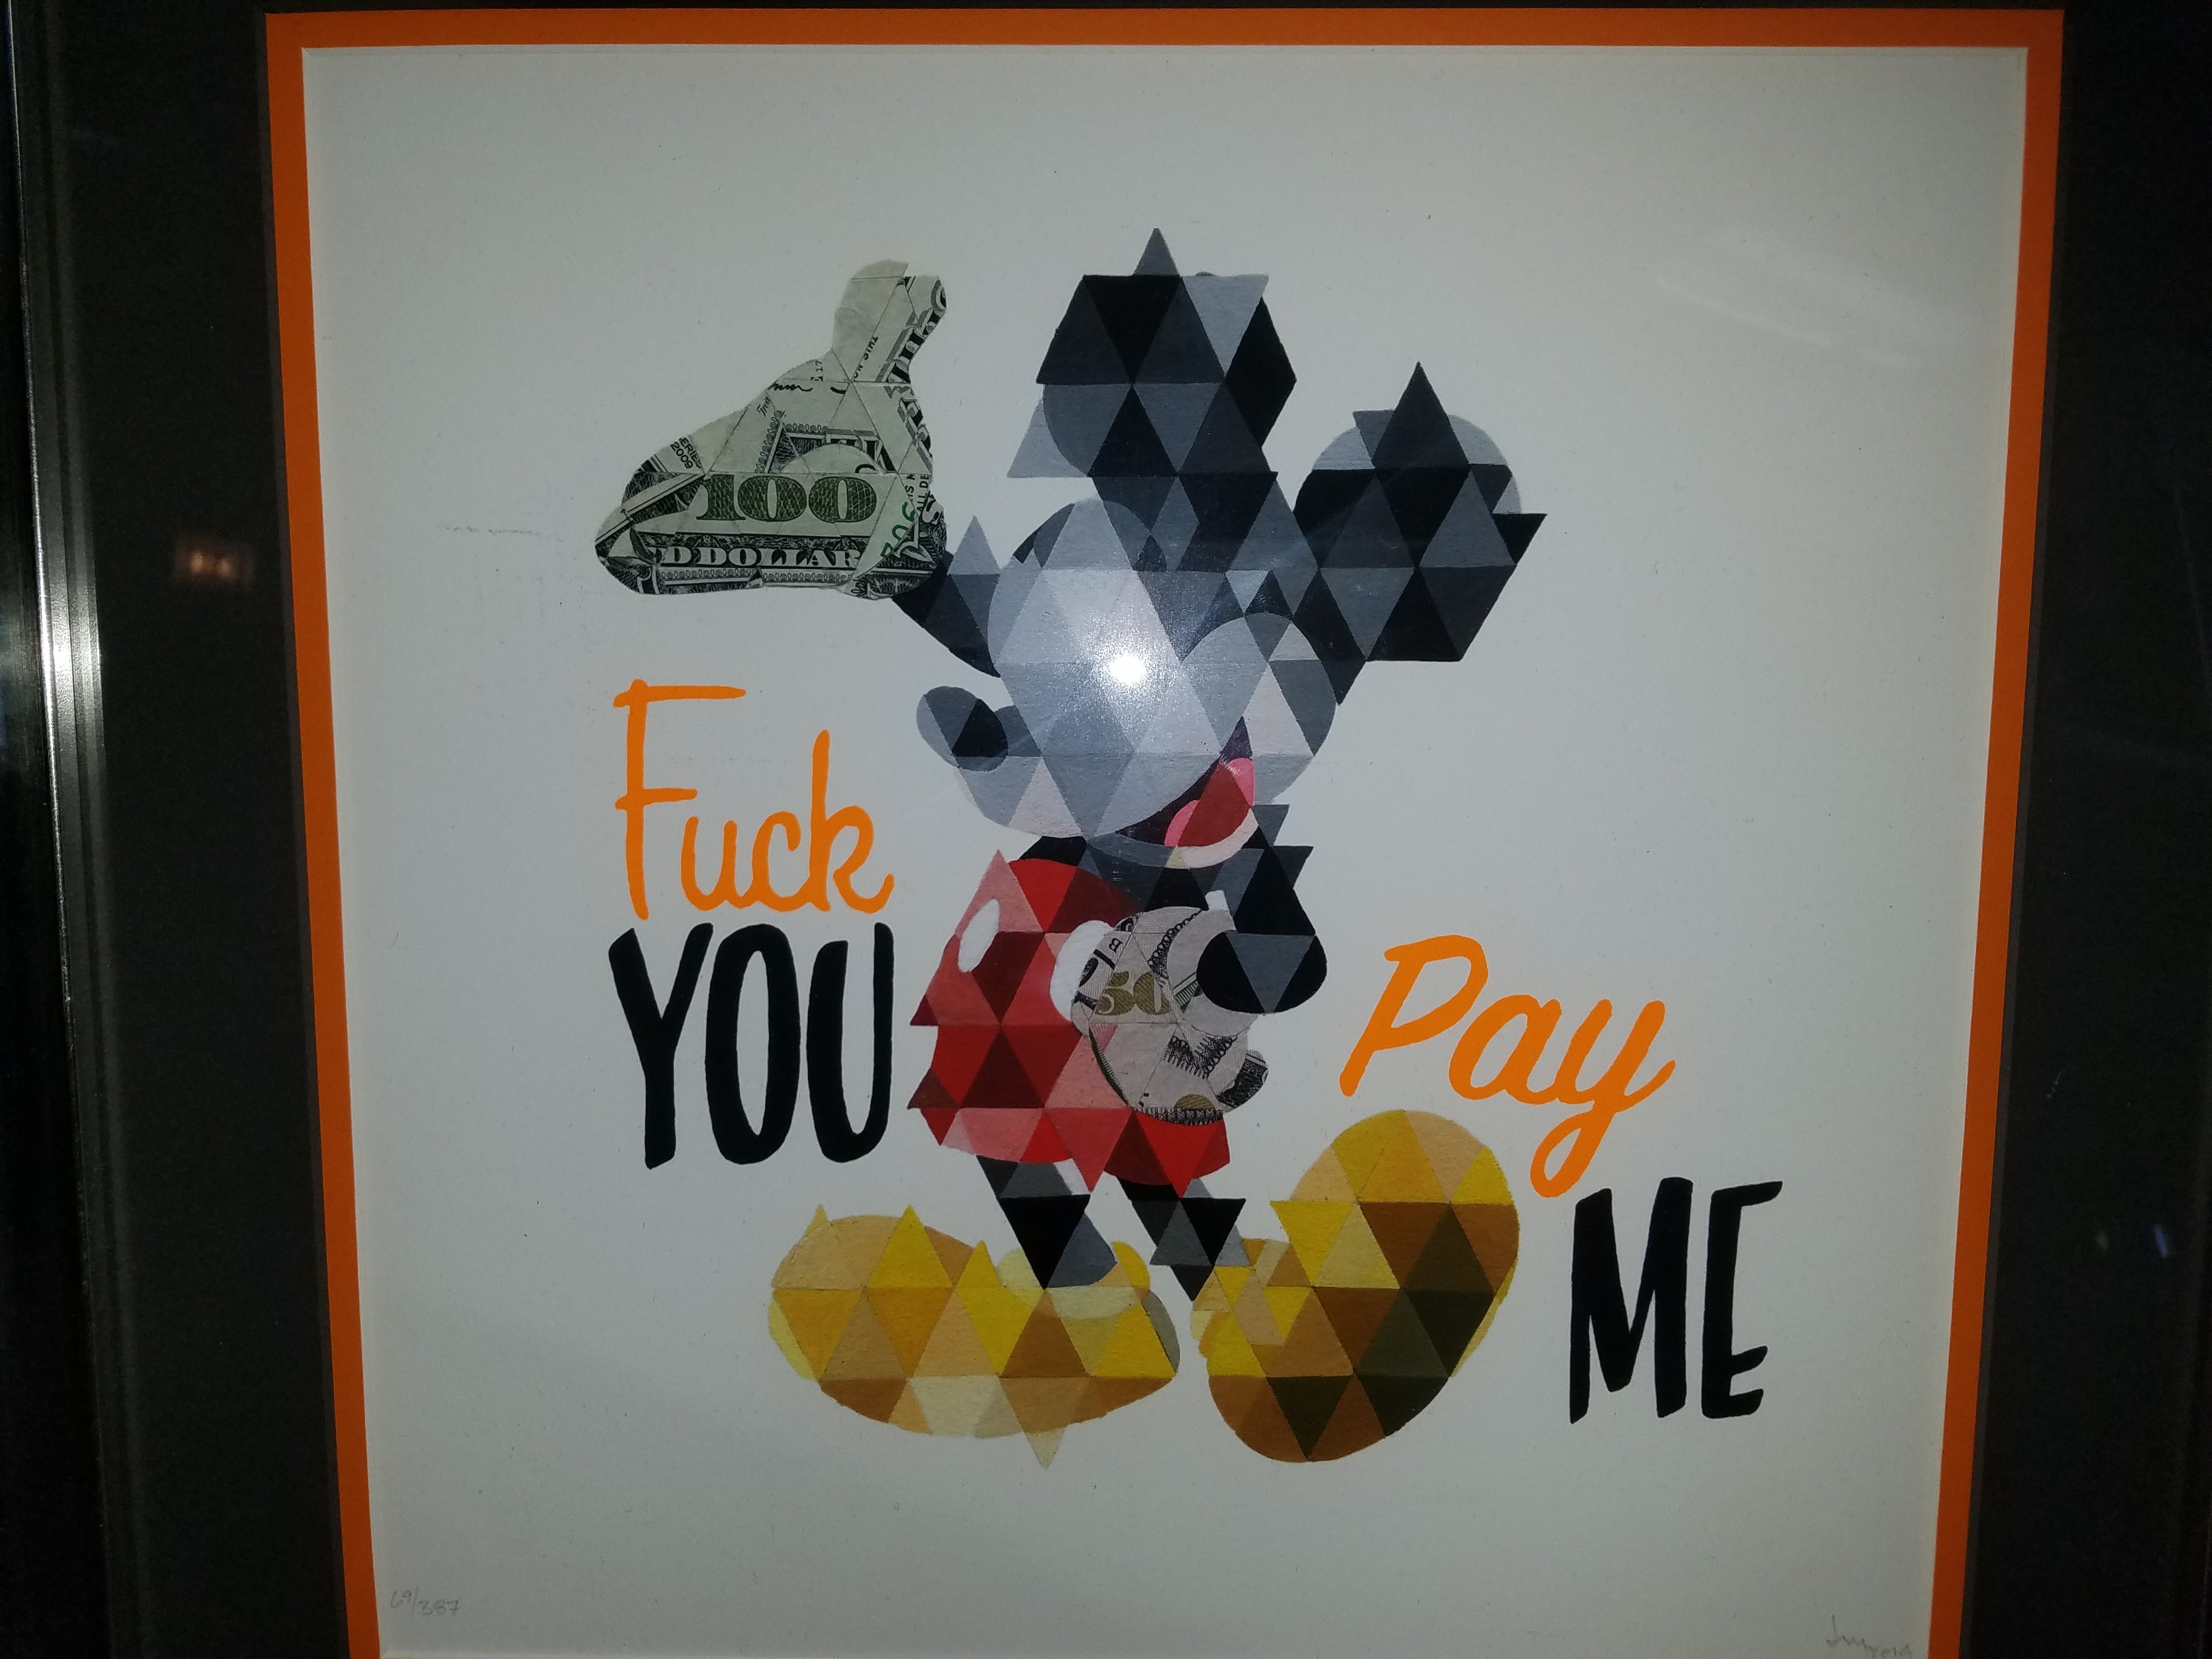 Title: F#ck You Pay Me  Artist:  Joseph Martinez  Edition:  xx/387 s/n  Type: Screen print poster FRAMED  Size: 12" x 12" out of the frame. 17.5" x 17.5" inches framed  Notes:   Released in 204.  In house and ready to ship!